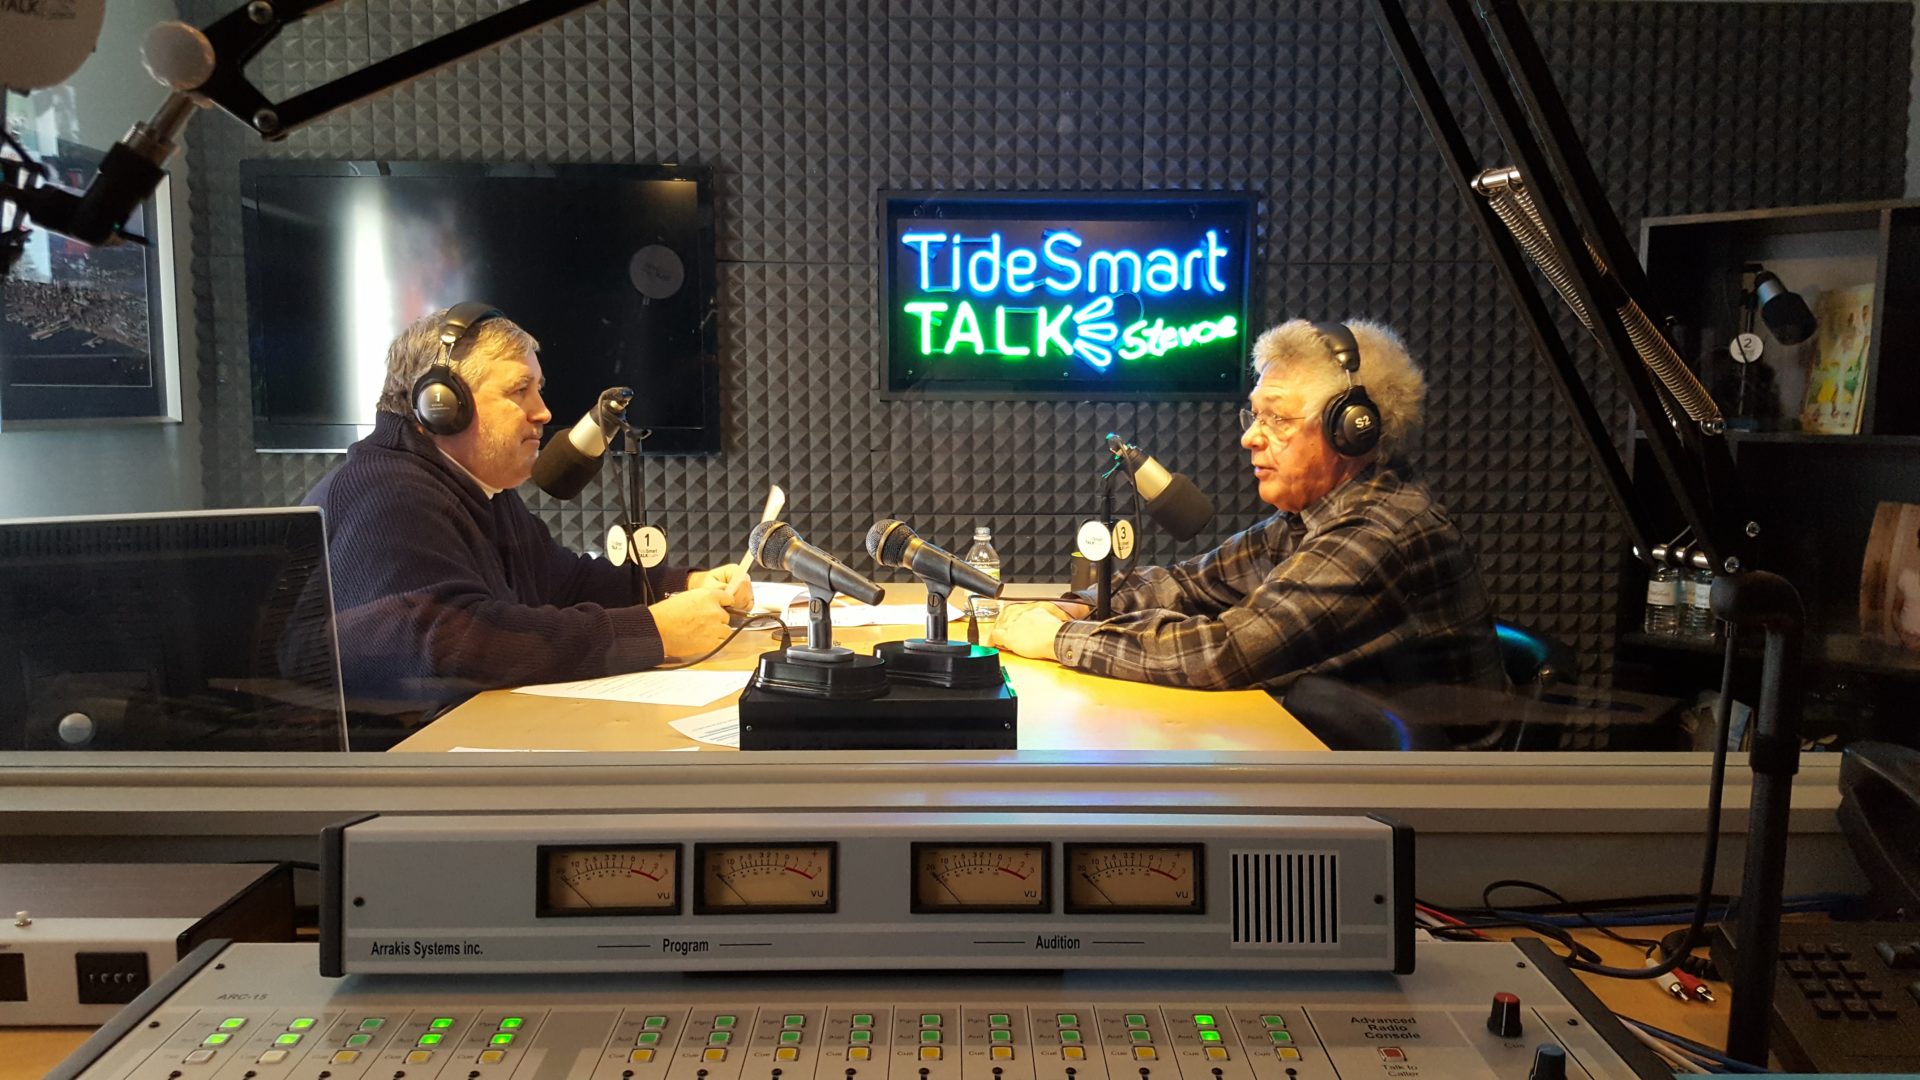 Host of TideSmart Talk with Stevoe, Steve Woods, welcomed Chris Sauer, Co-Founder & CEO of Ocean Renewable Power Company (at right).